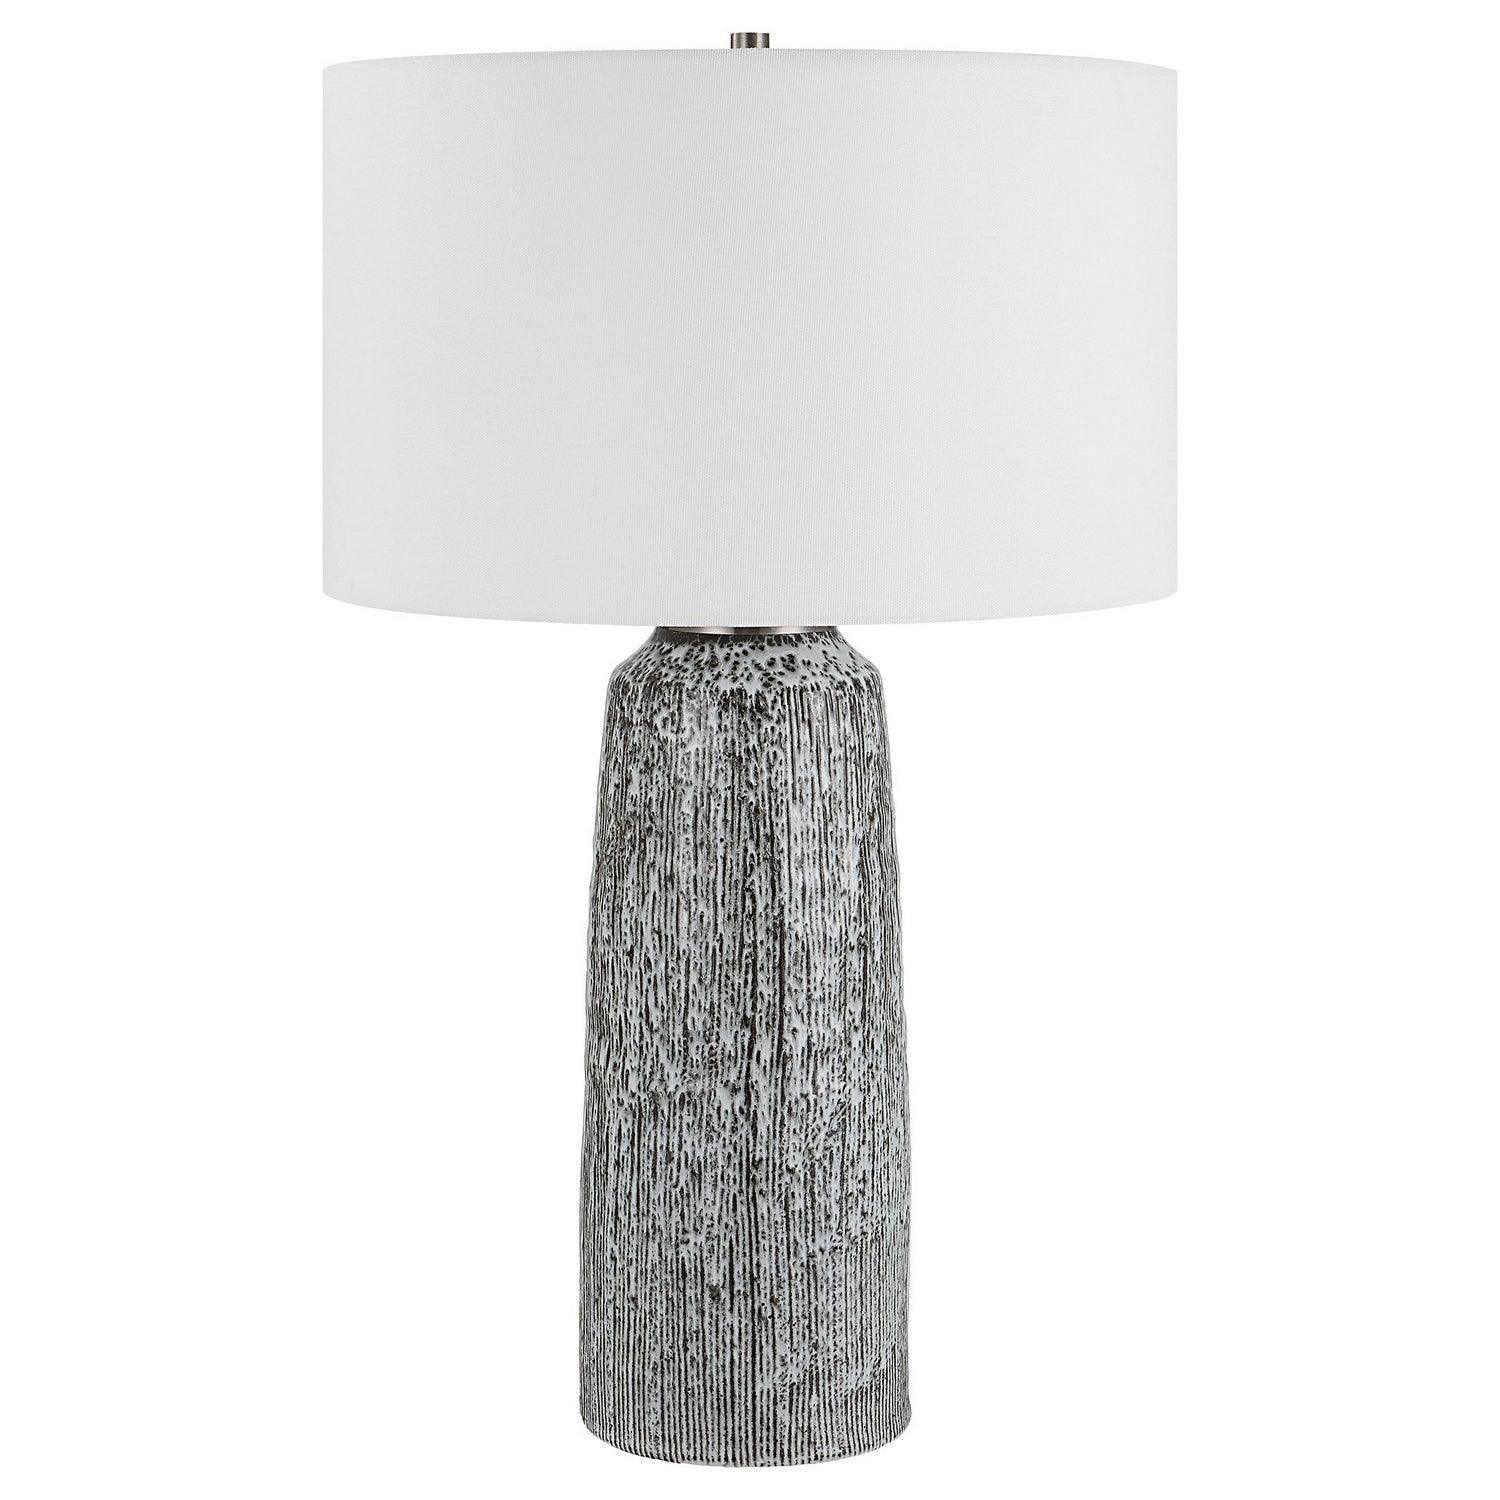 The Uttermost - Static Table Lamp - 30061-1 | Montreal Lighting & Hardware